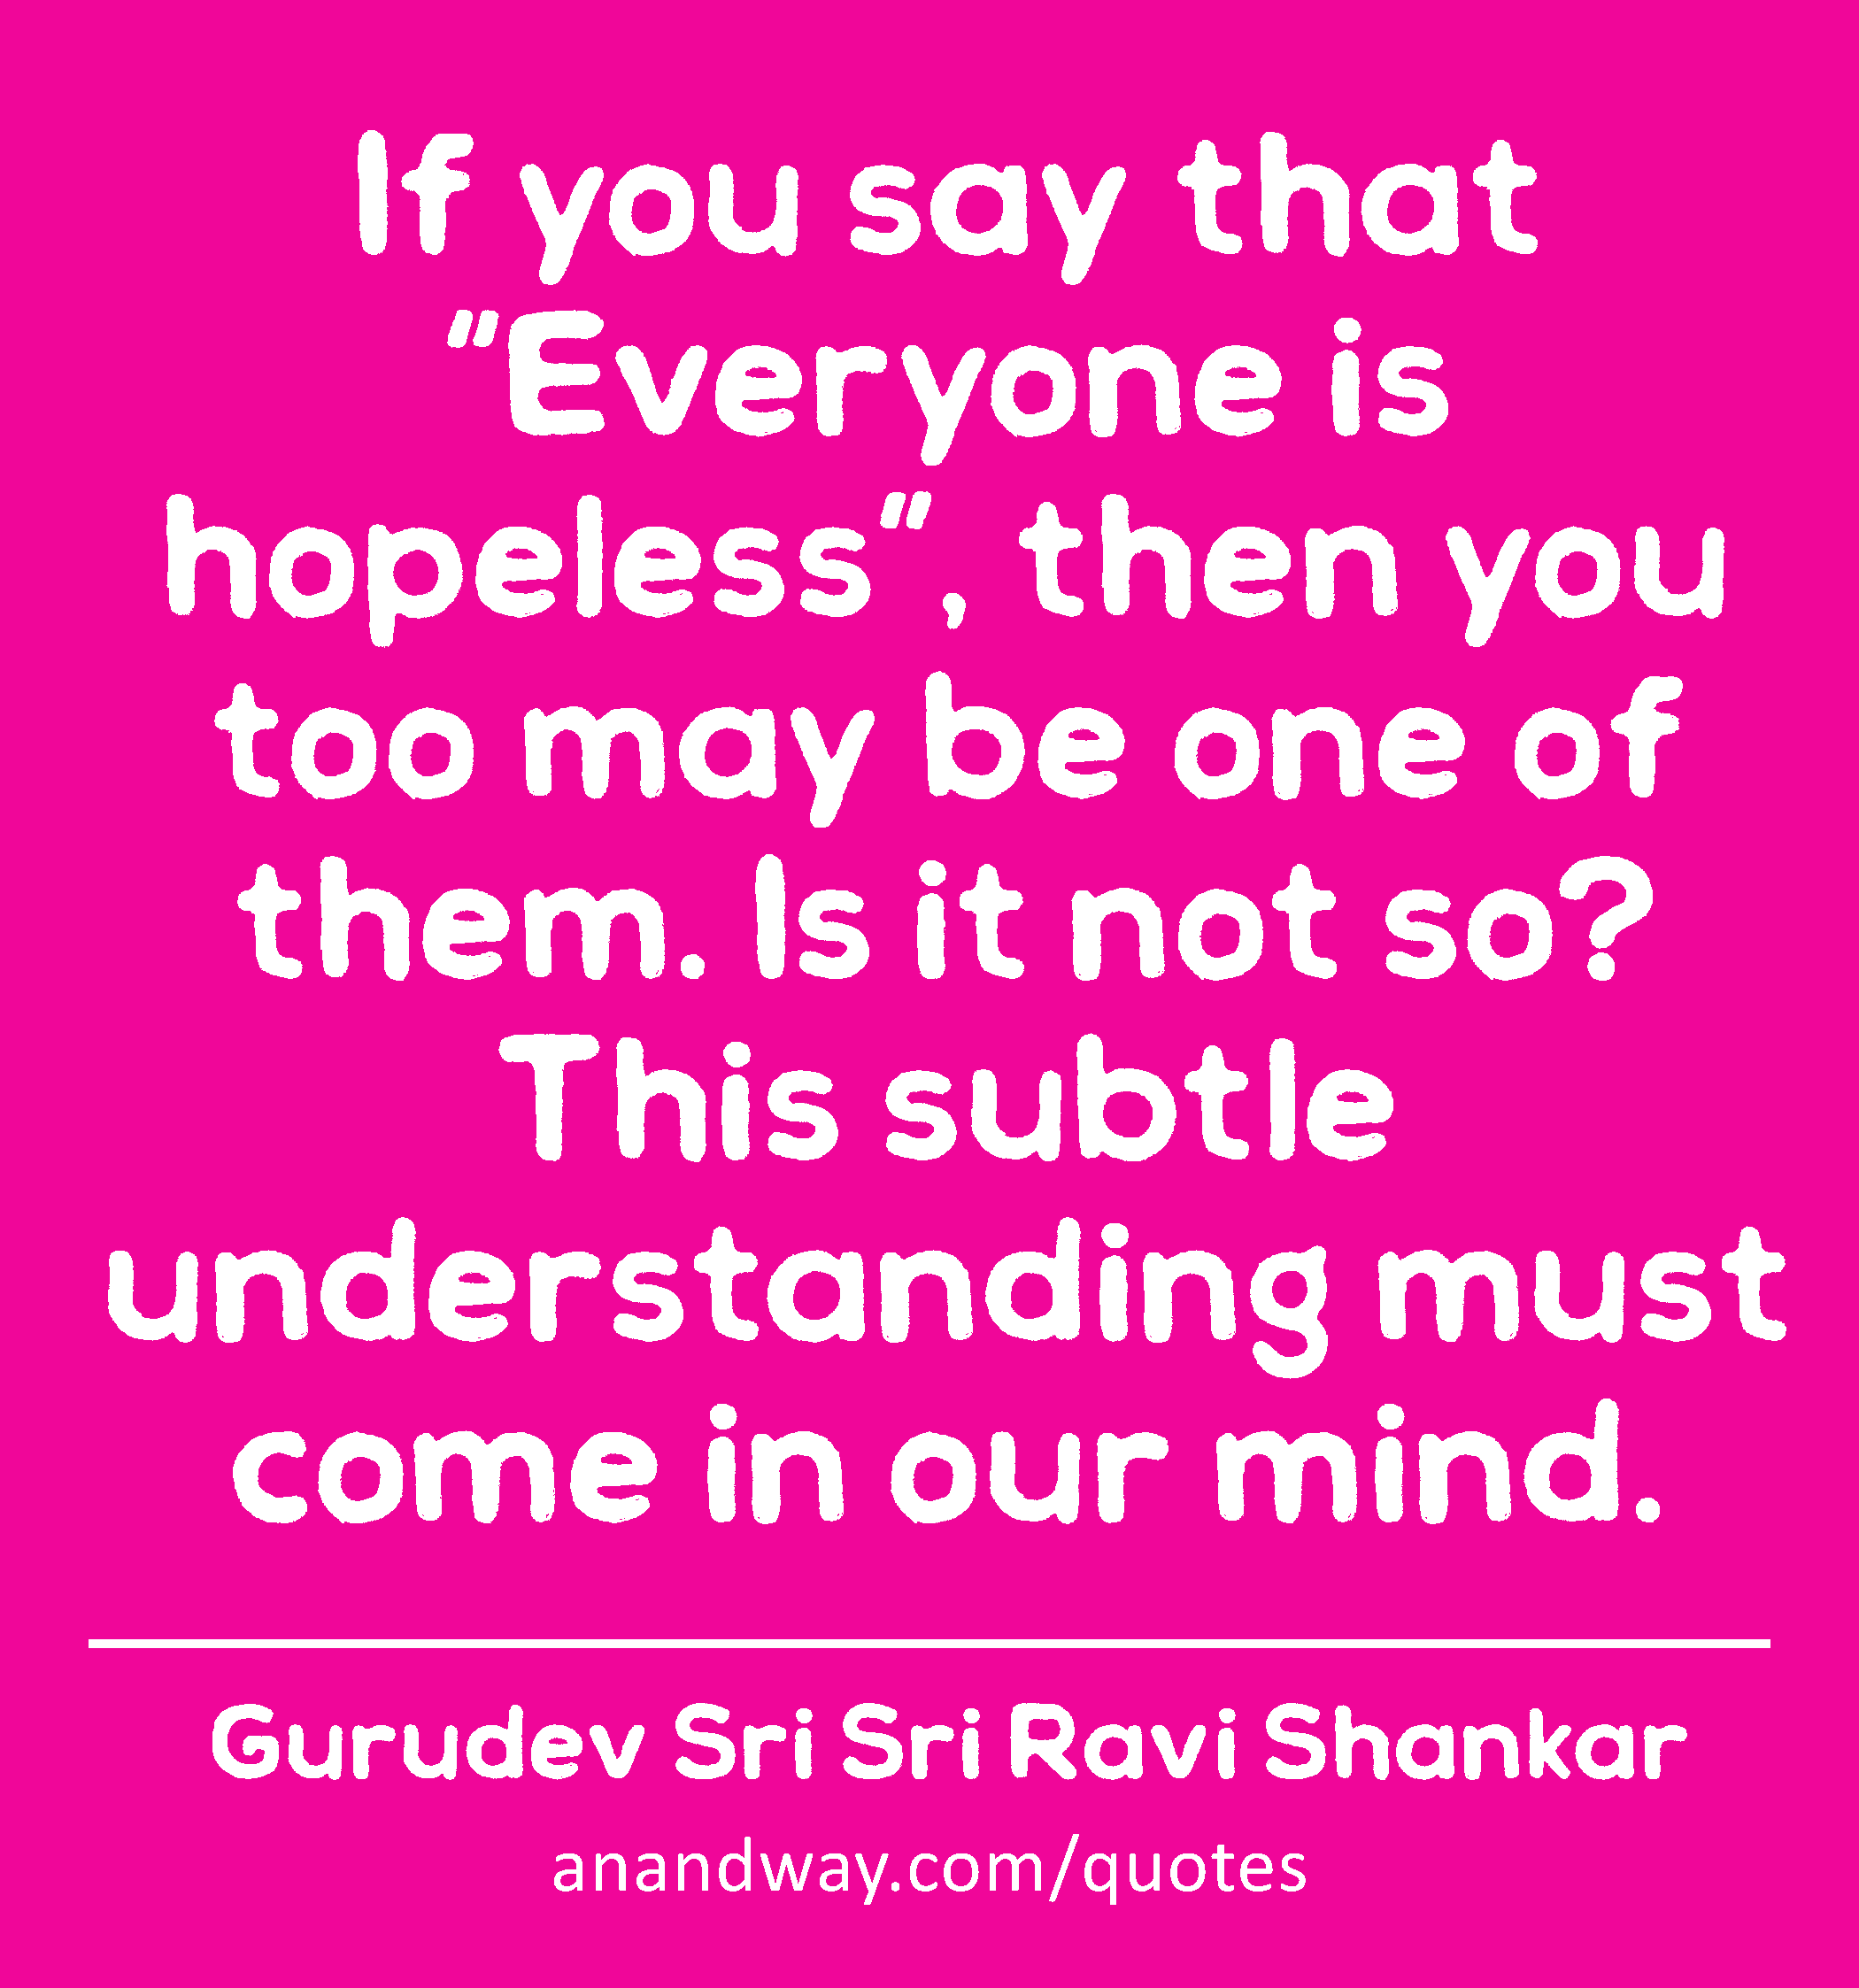 If you say that “Everyone is hopeless”, then you too may be one of them. Is it not so? This subtle
 -Gurudev Sri Sri Ravi Shankar